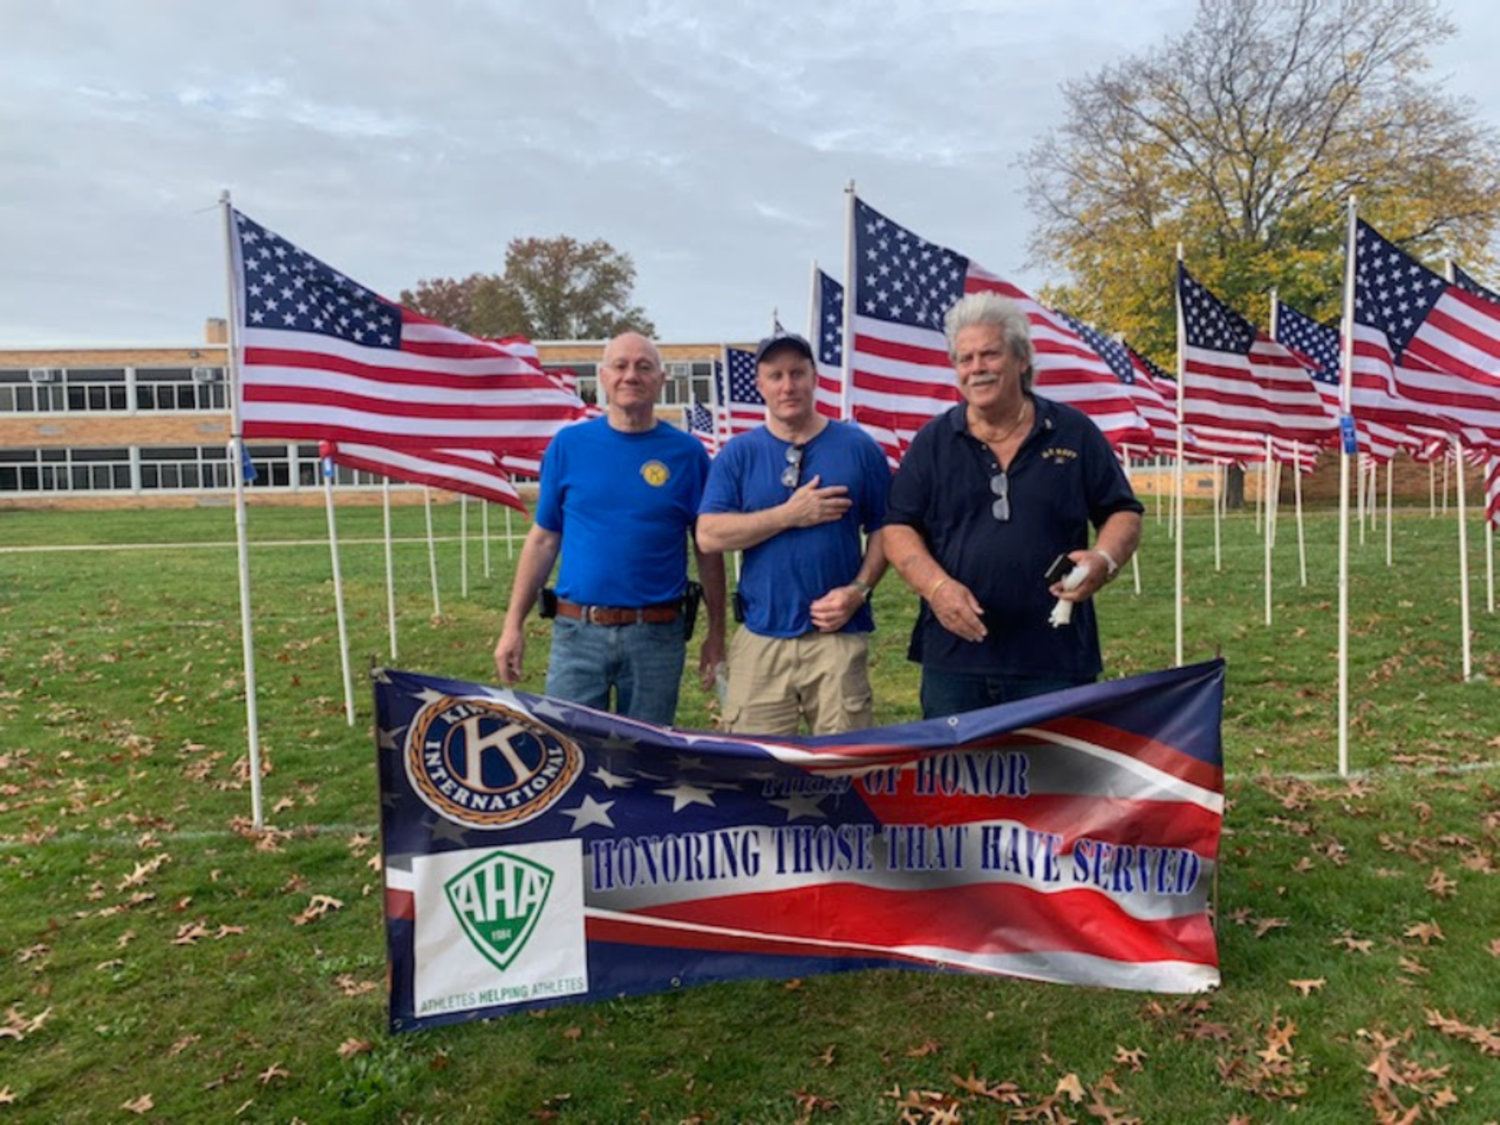 Steve LaSala, Brian O’Flaherty, and Richie Krug Sr., helped put up the Field of Honor flags at East Meadow High School.